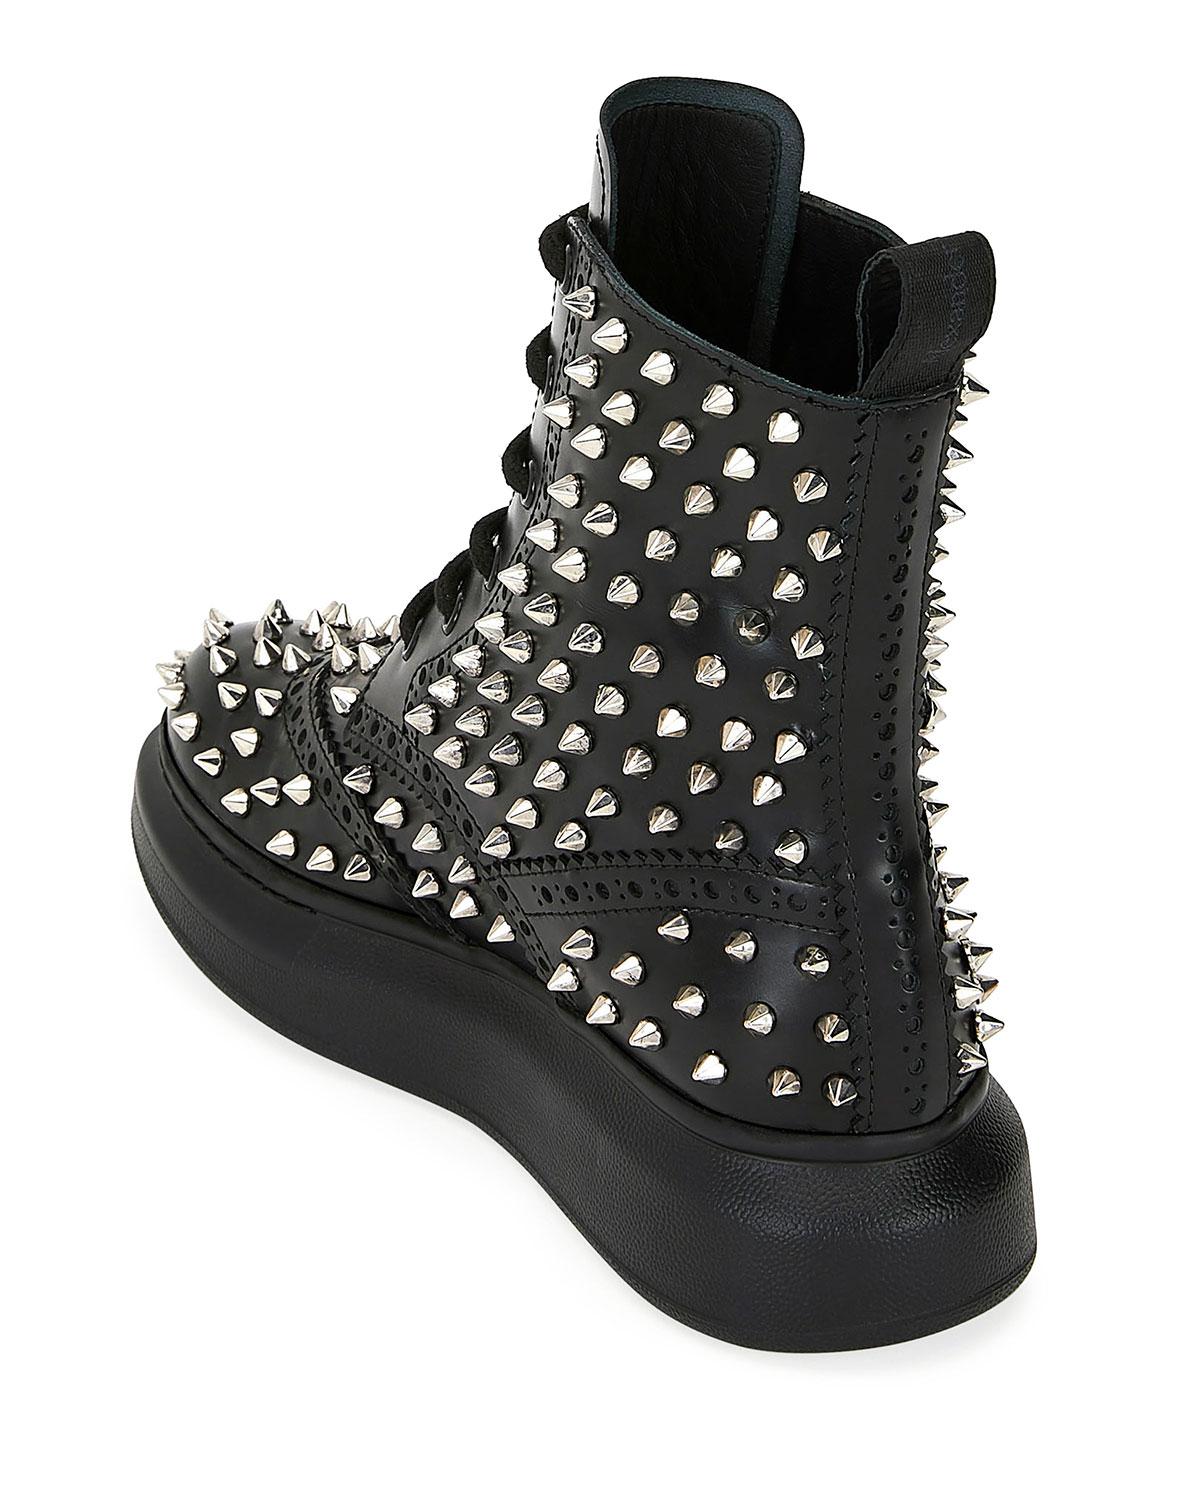 Alexander McQueen Leather Hybrid Lace Up Boot in Black/Silver (Black ...